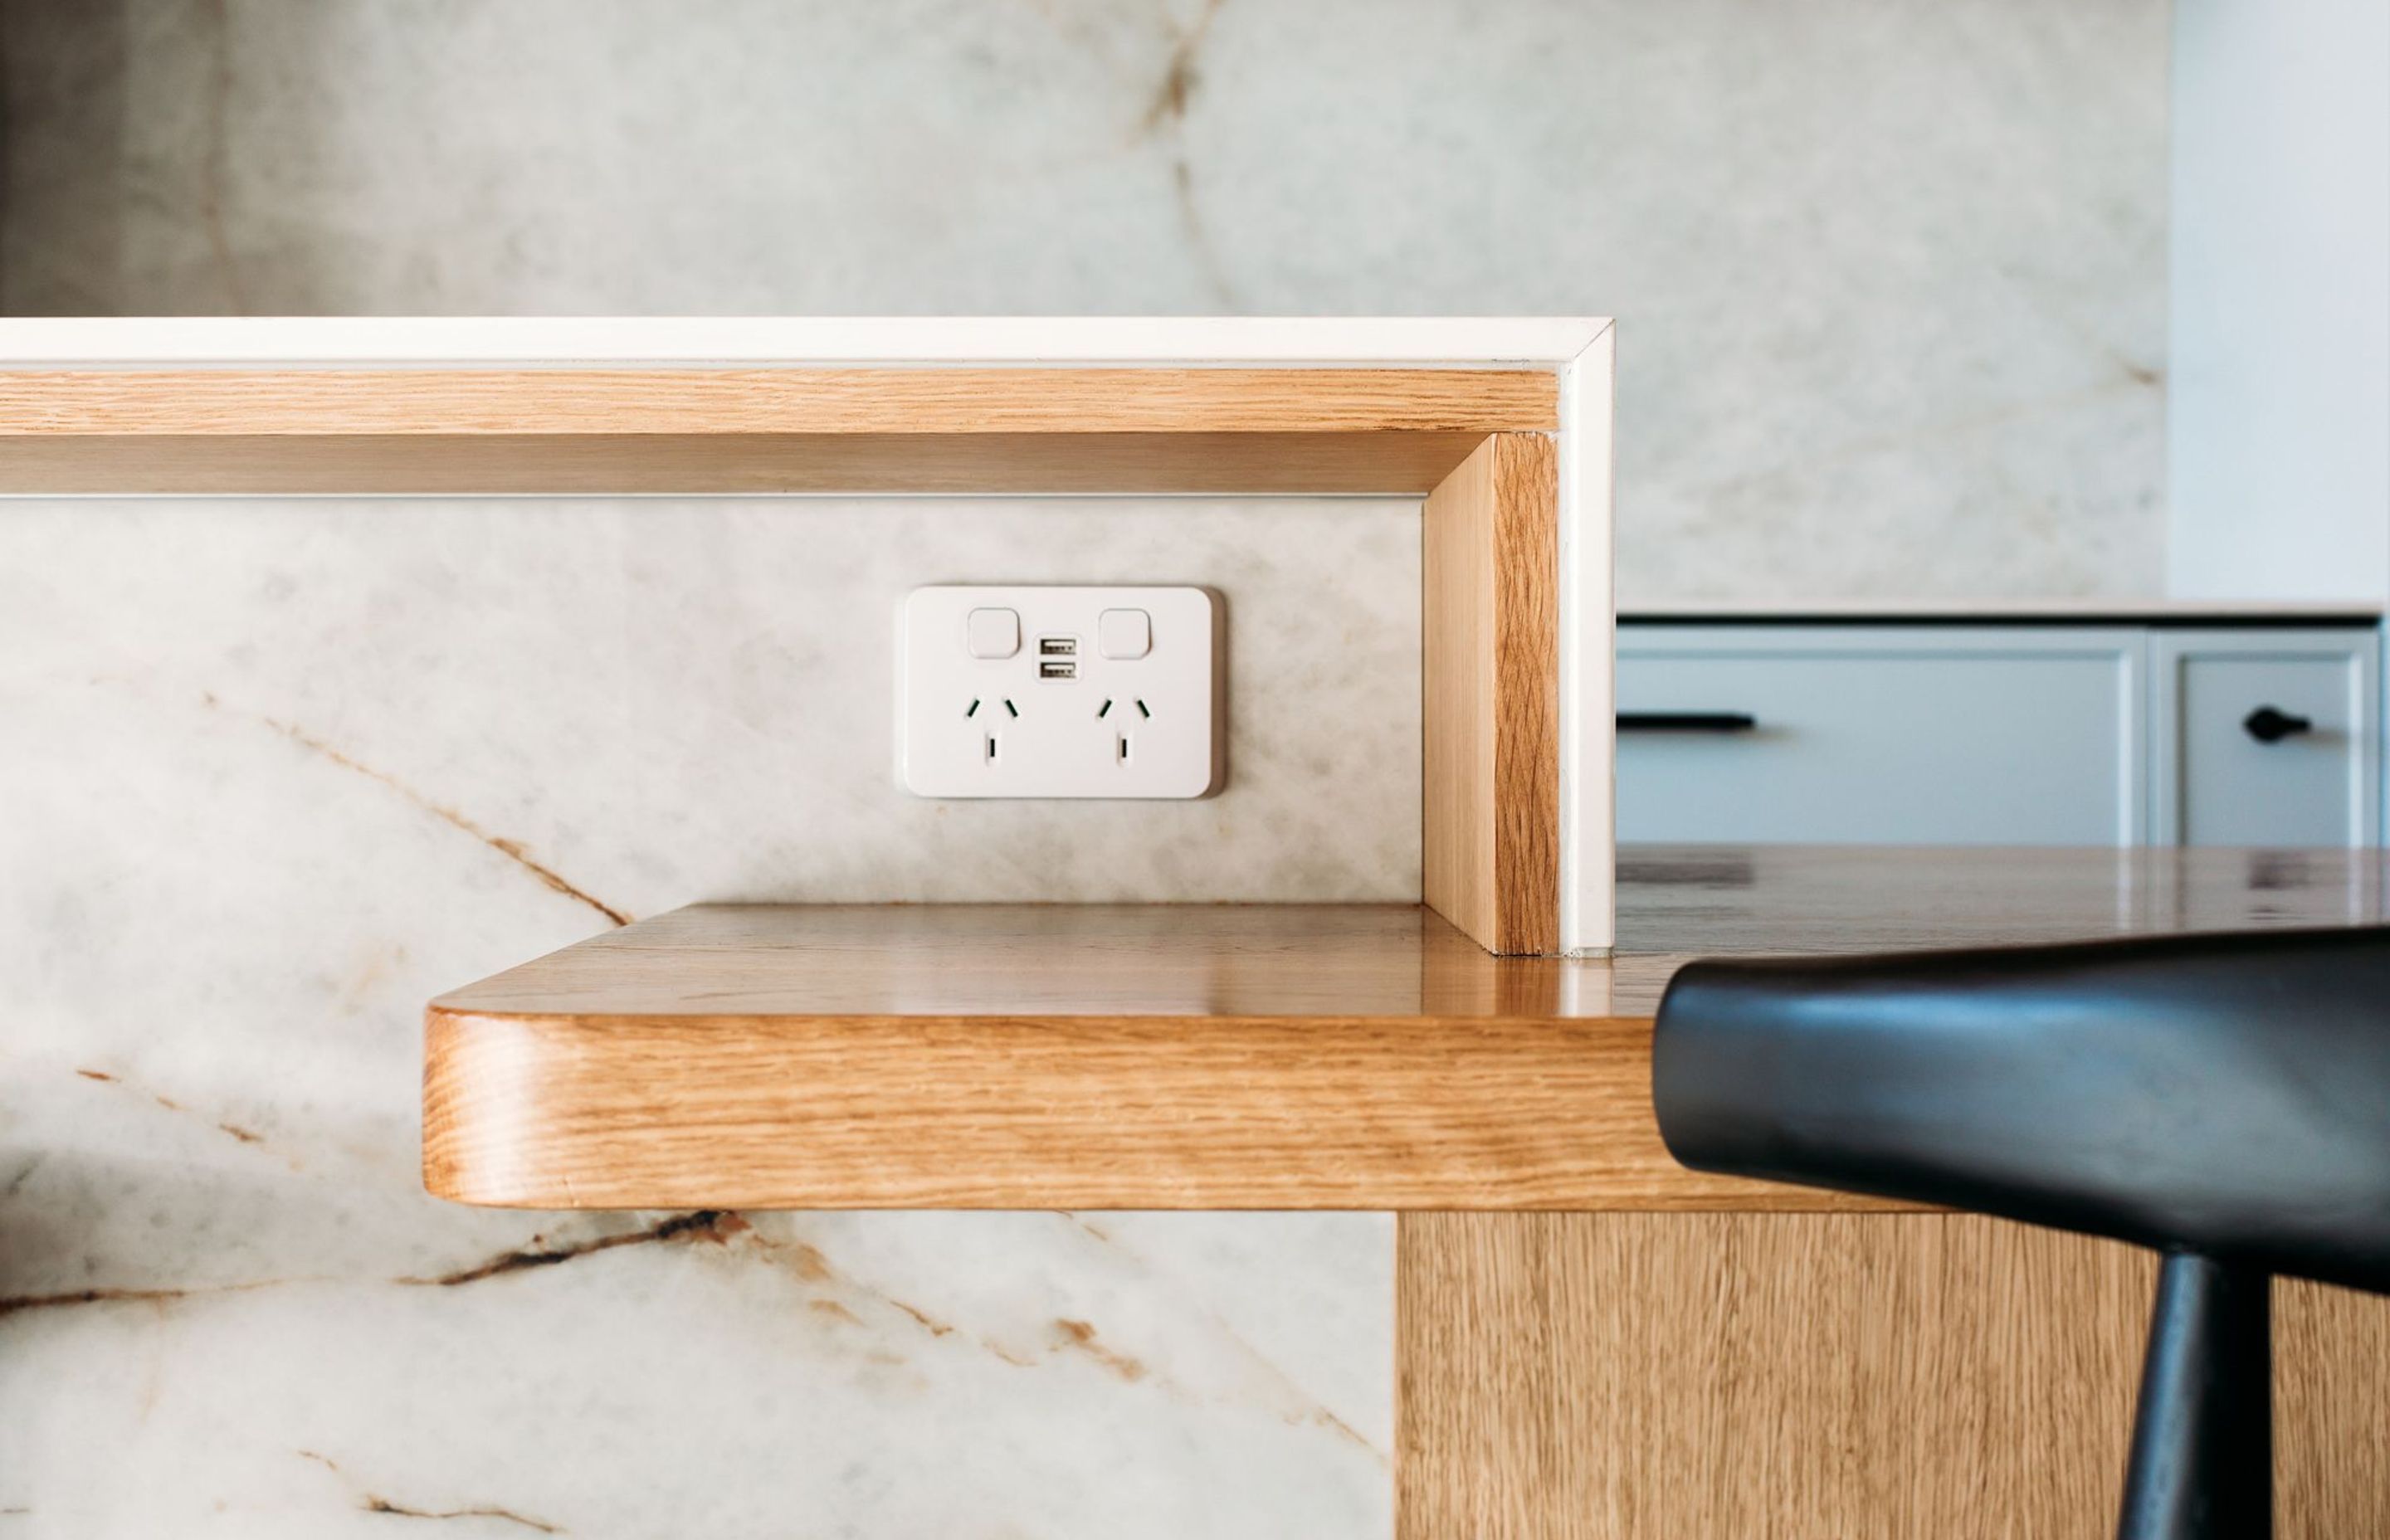 This solid oak shelf is a tidy nook to house charging phones, the pen box and the shopping list.